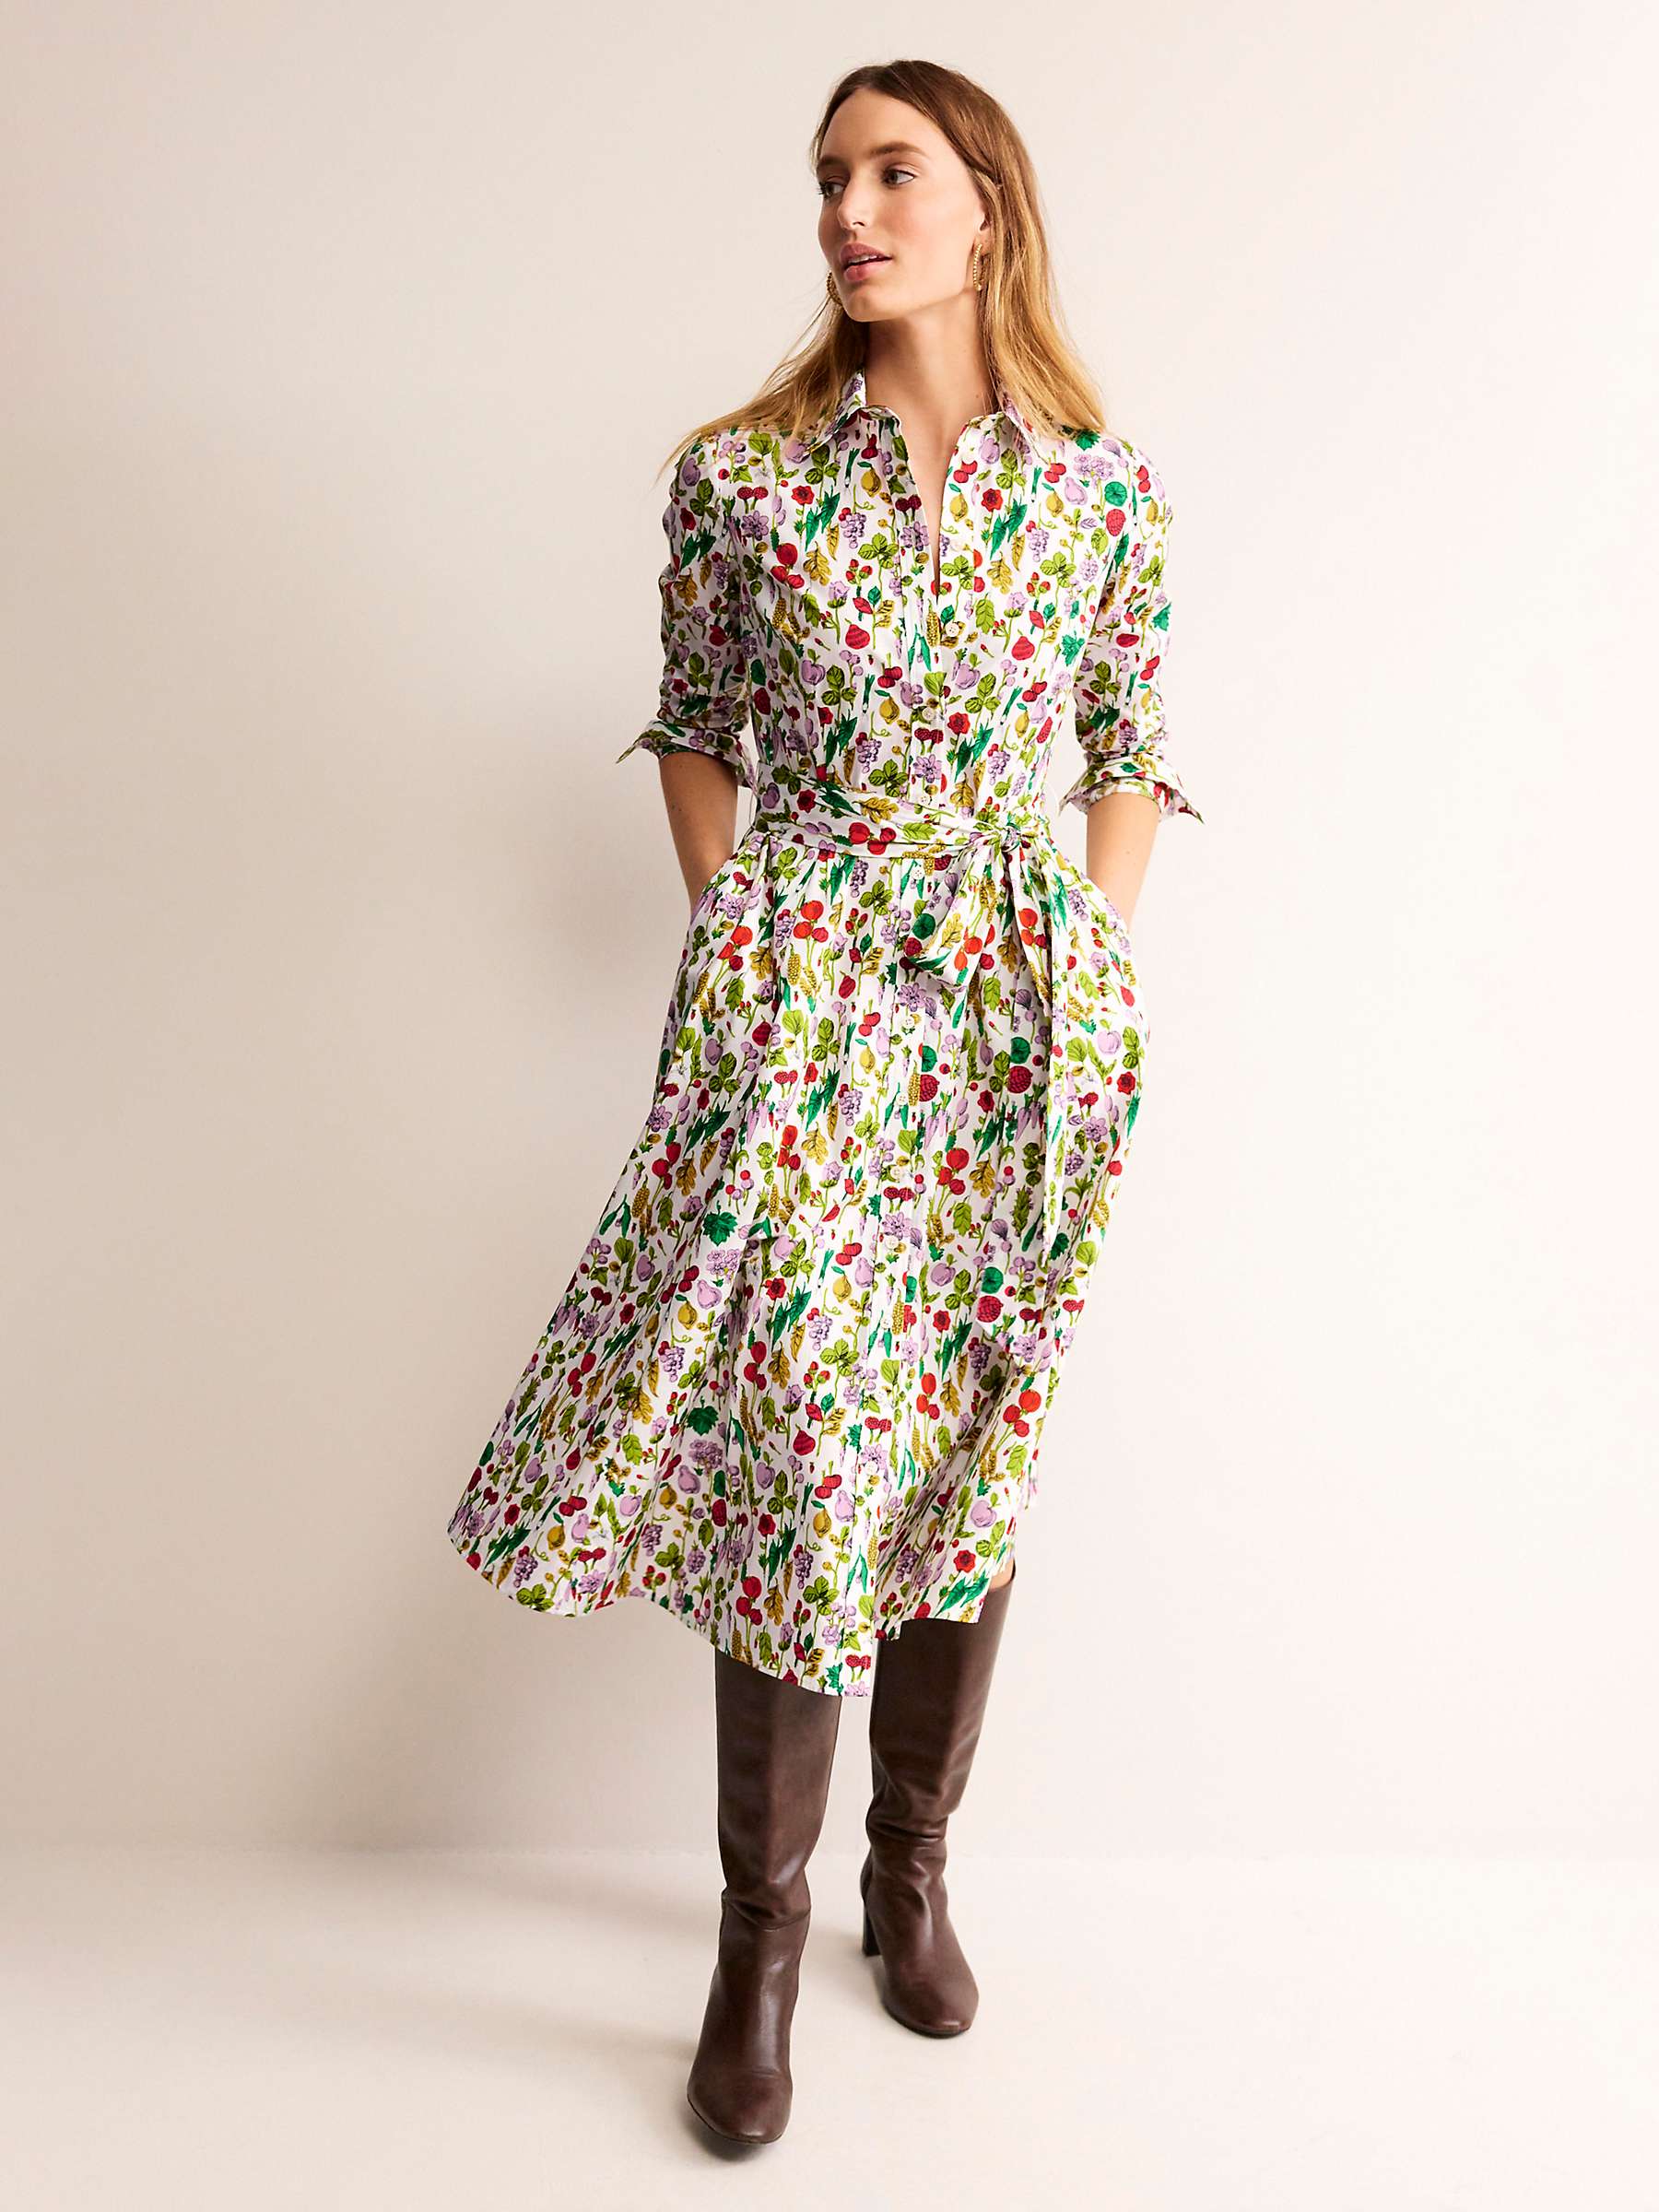 Boden Amy Cotton Floral Midi Dress, Ivory/Multi at John Lewis & Partners